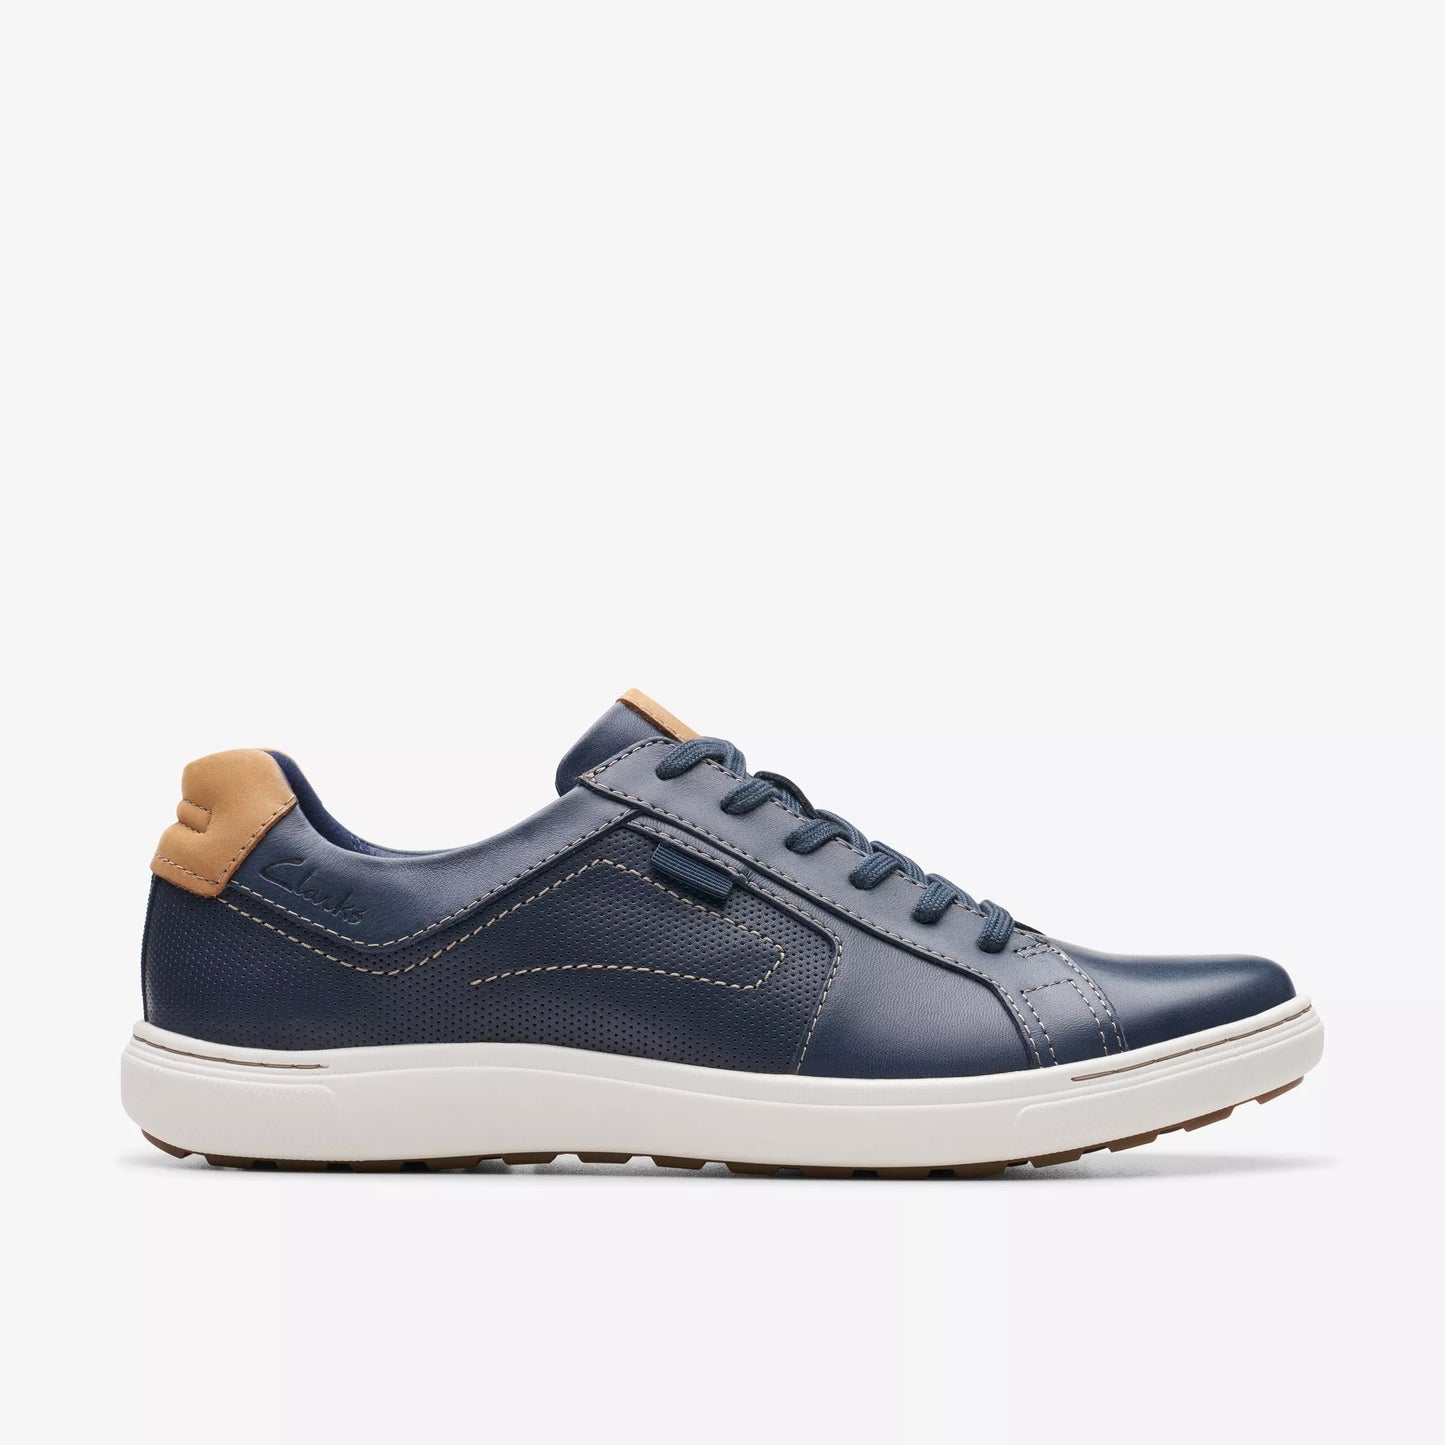 CLARKS | SABATES CASUALS PER A HOME | MAPSTONE LACE NAVY LEATHER | BLAVA